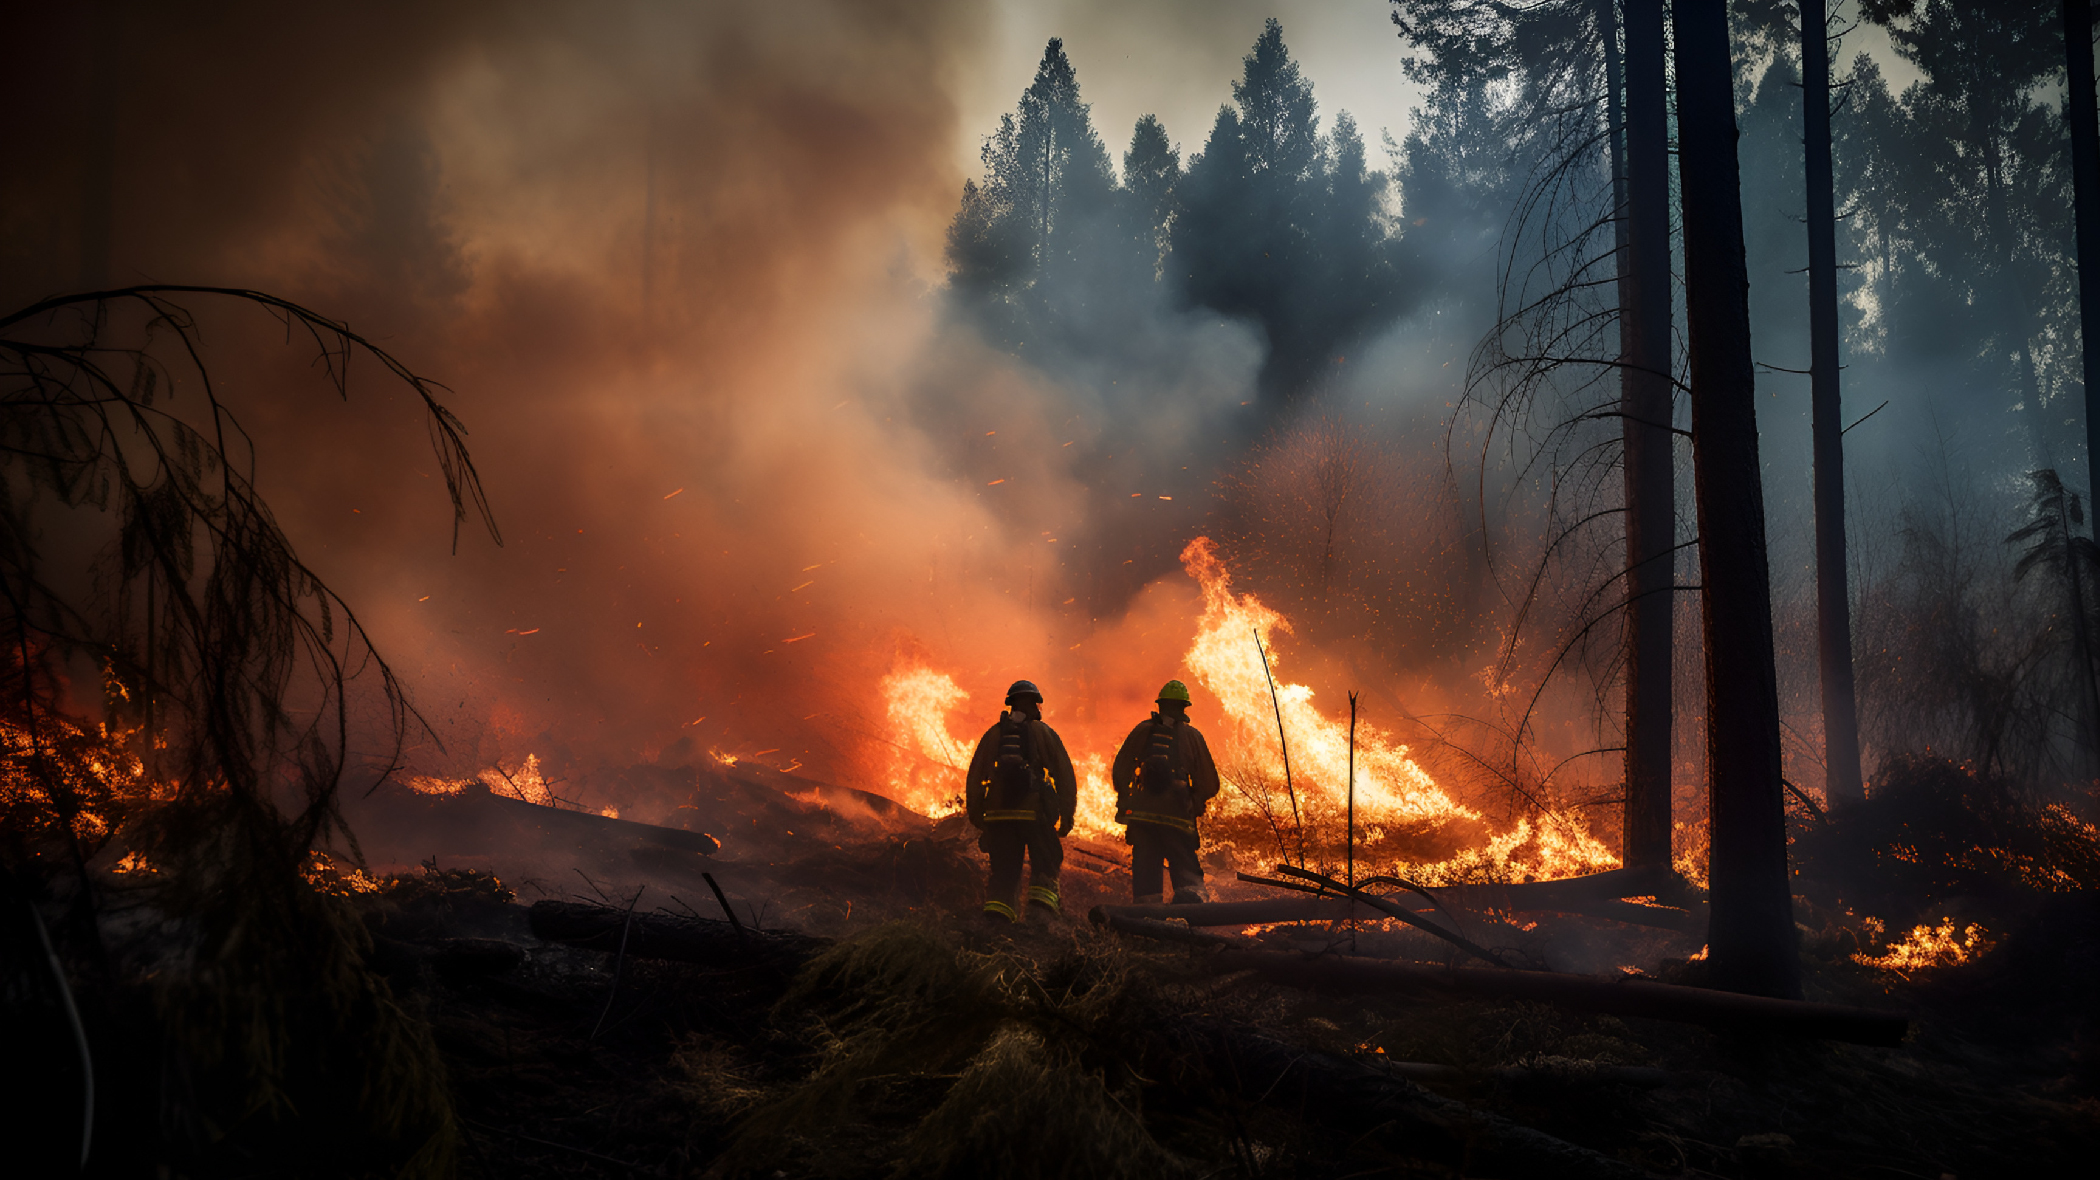 Wildland firefighters standing in front of a fire, silhouetted by the flames